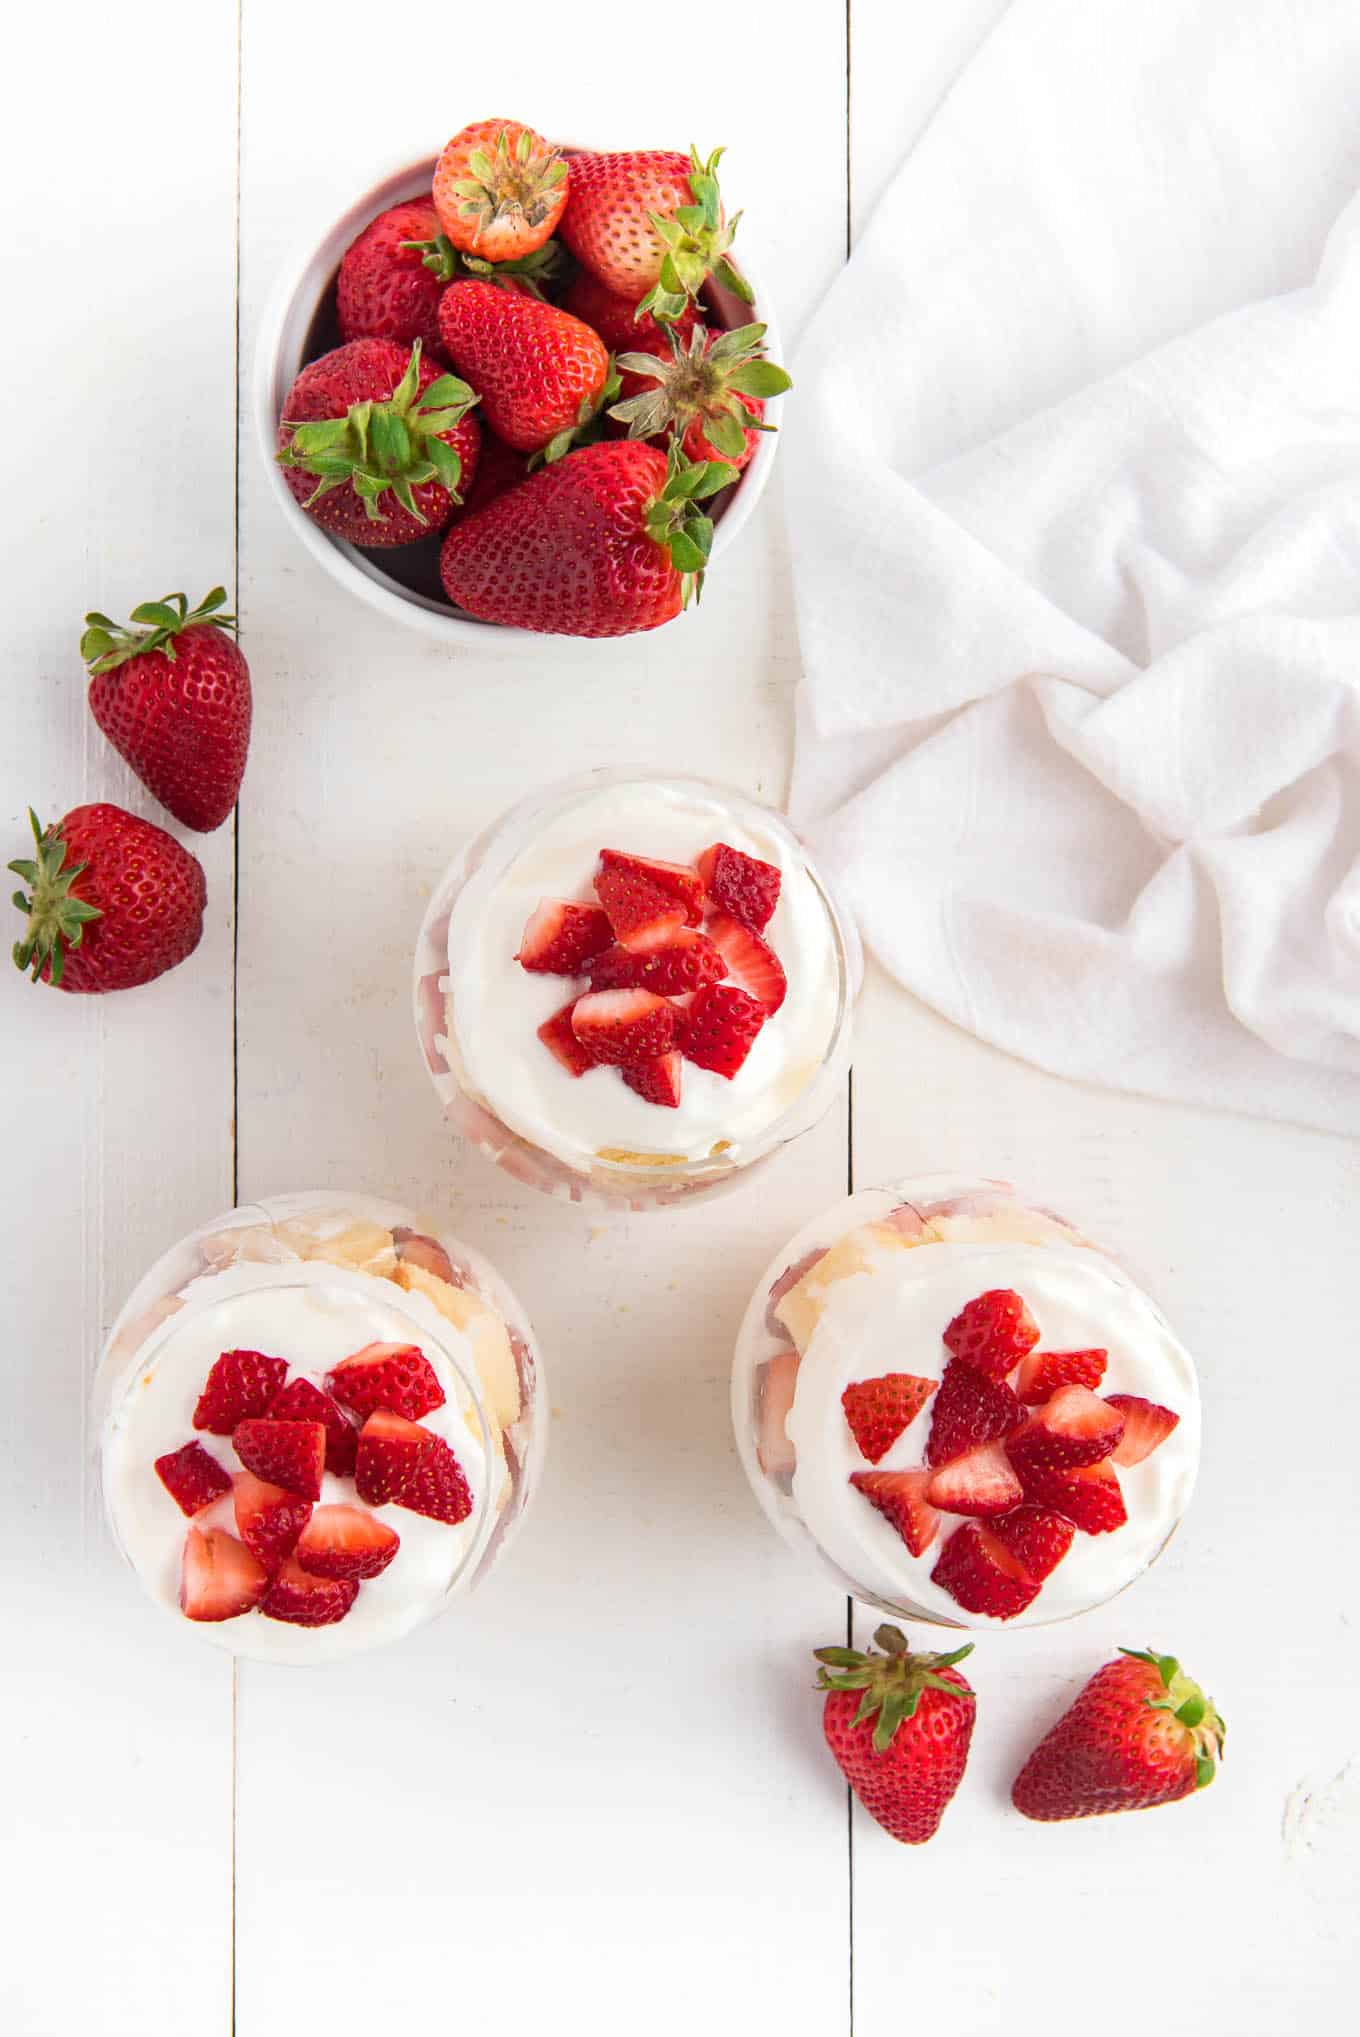 Strawberry Shortcake Cups Recipe - The Cookie Rookie®